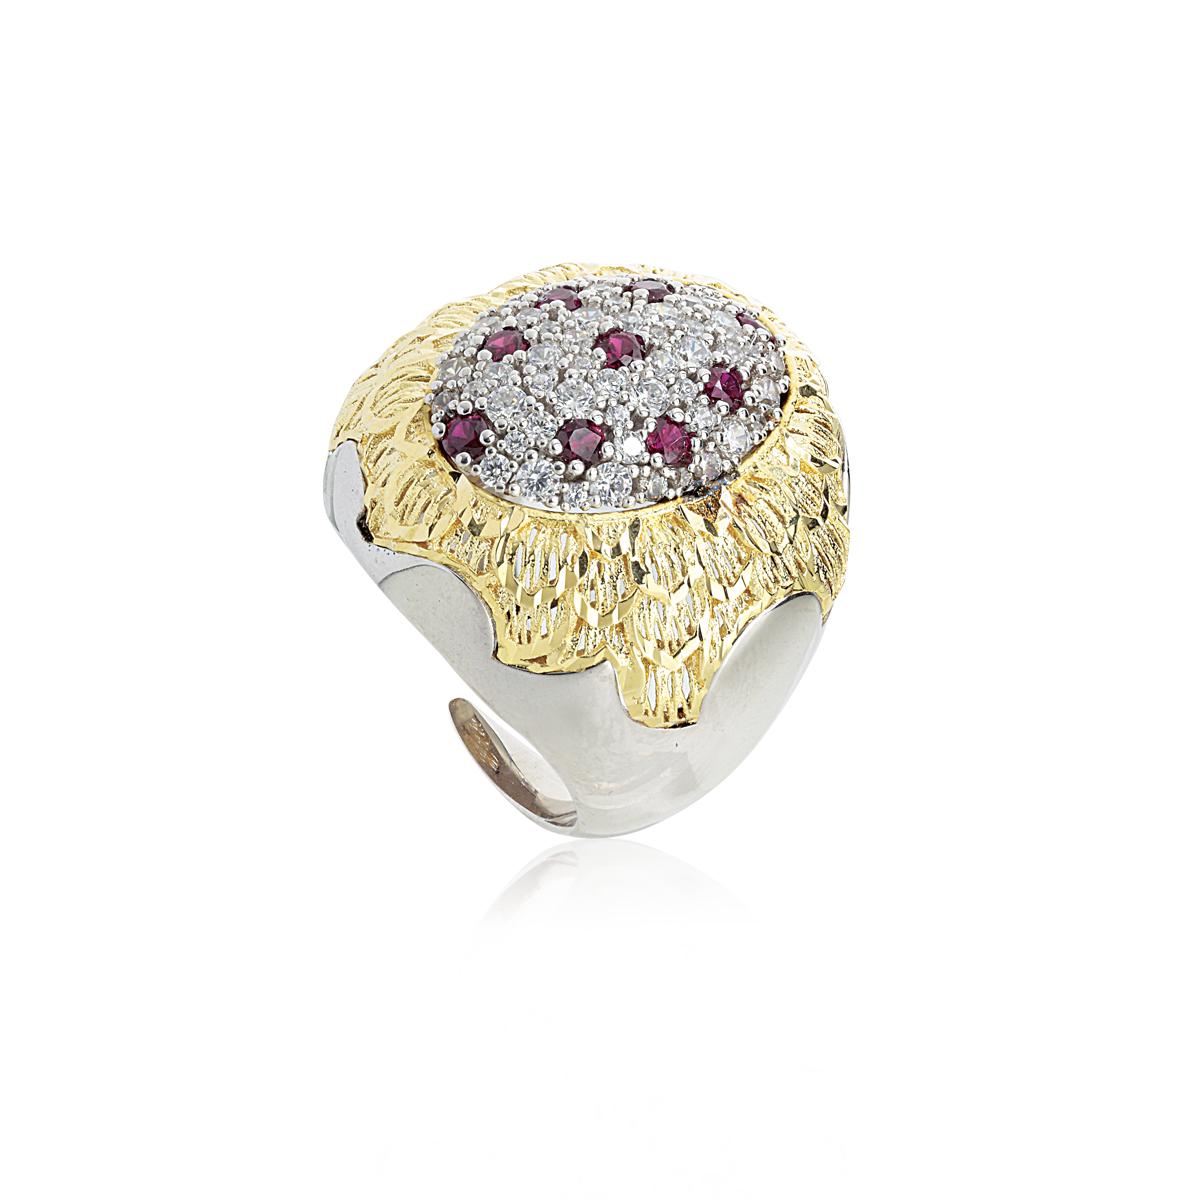 925 rhodium silver ring with golden inserts and zircons pave - ZAN519-LN